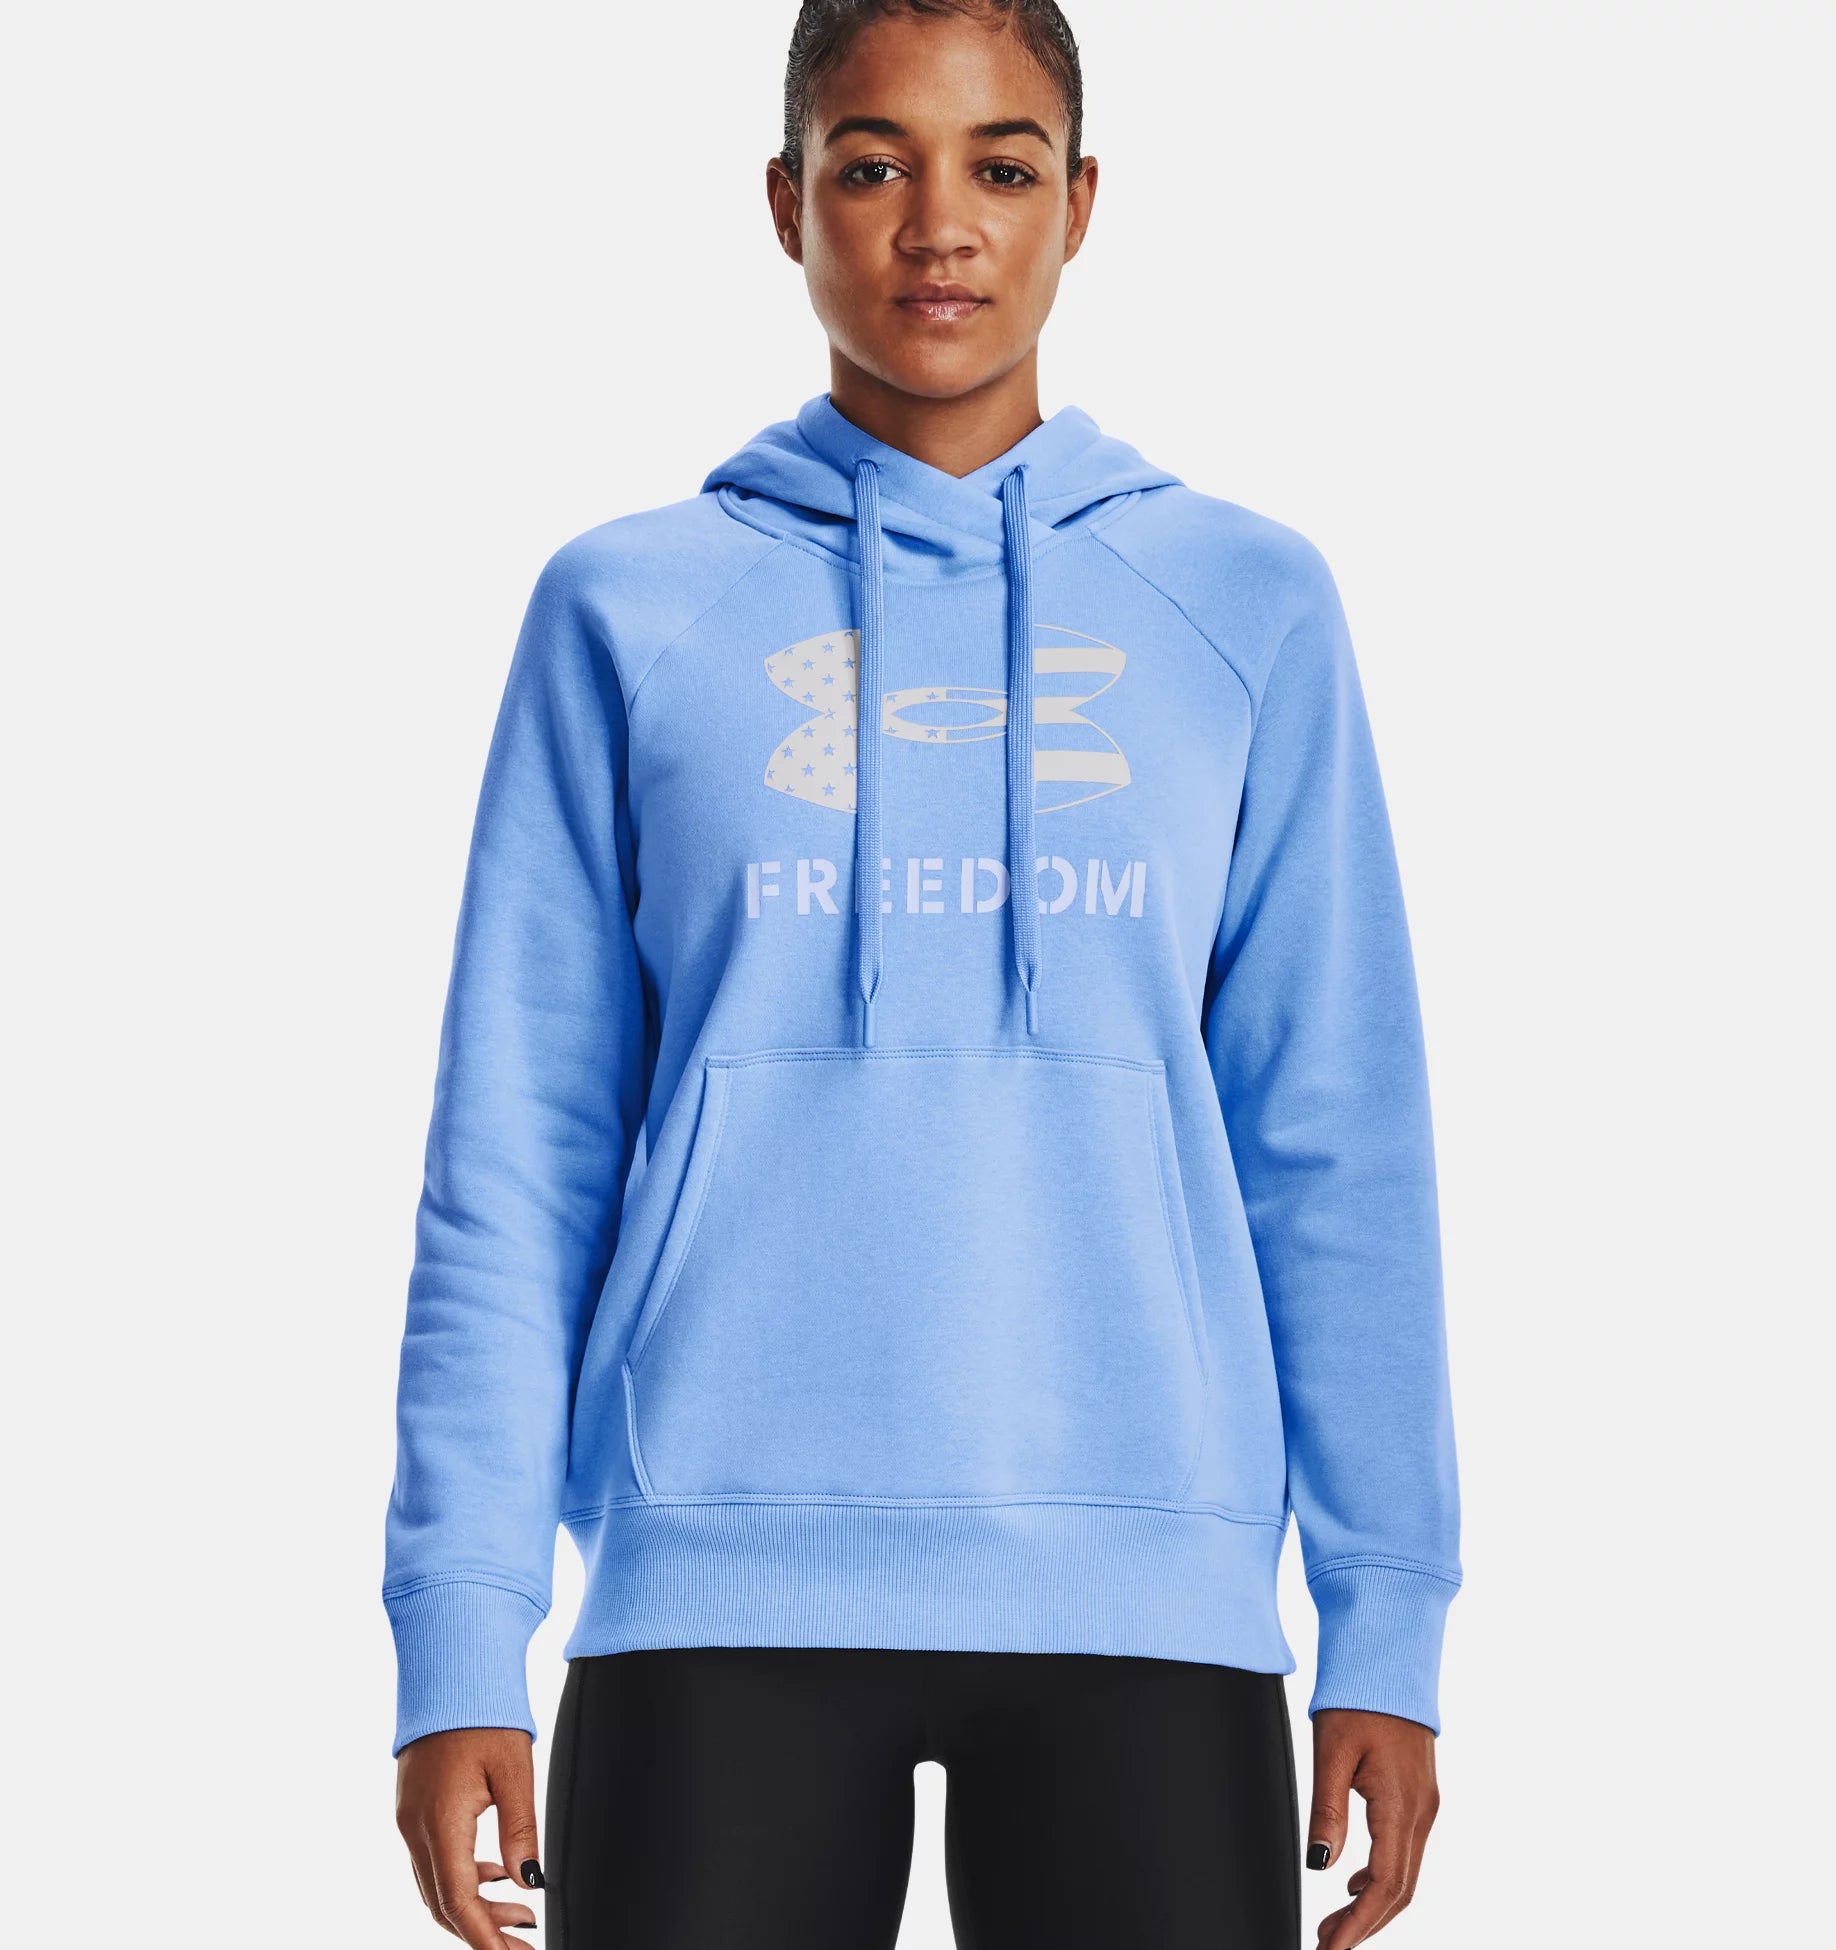 Under Armour Women's UA Freedom Rival Hoodie 1370026 - Discontinued